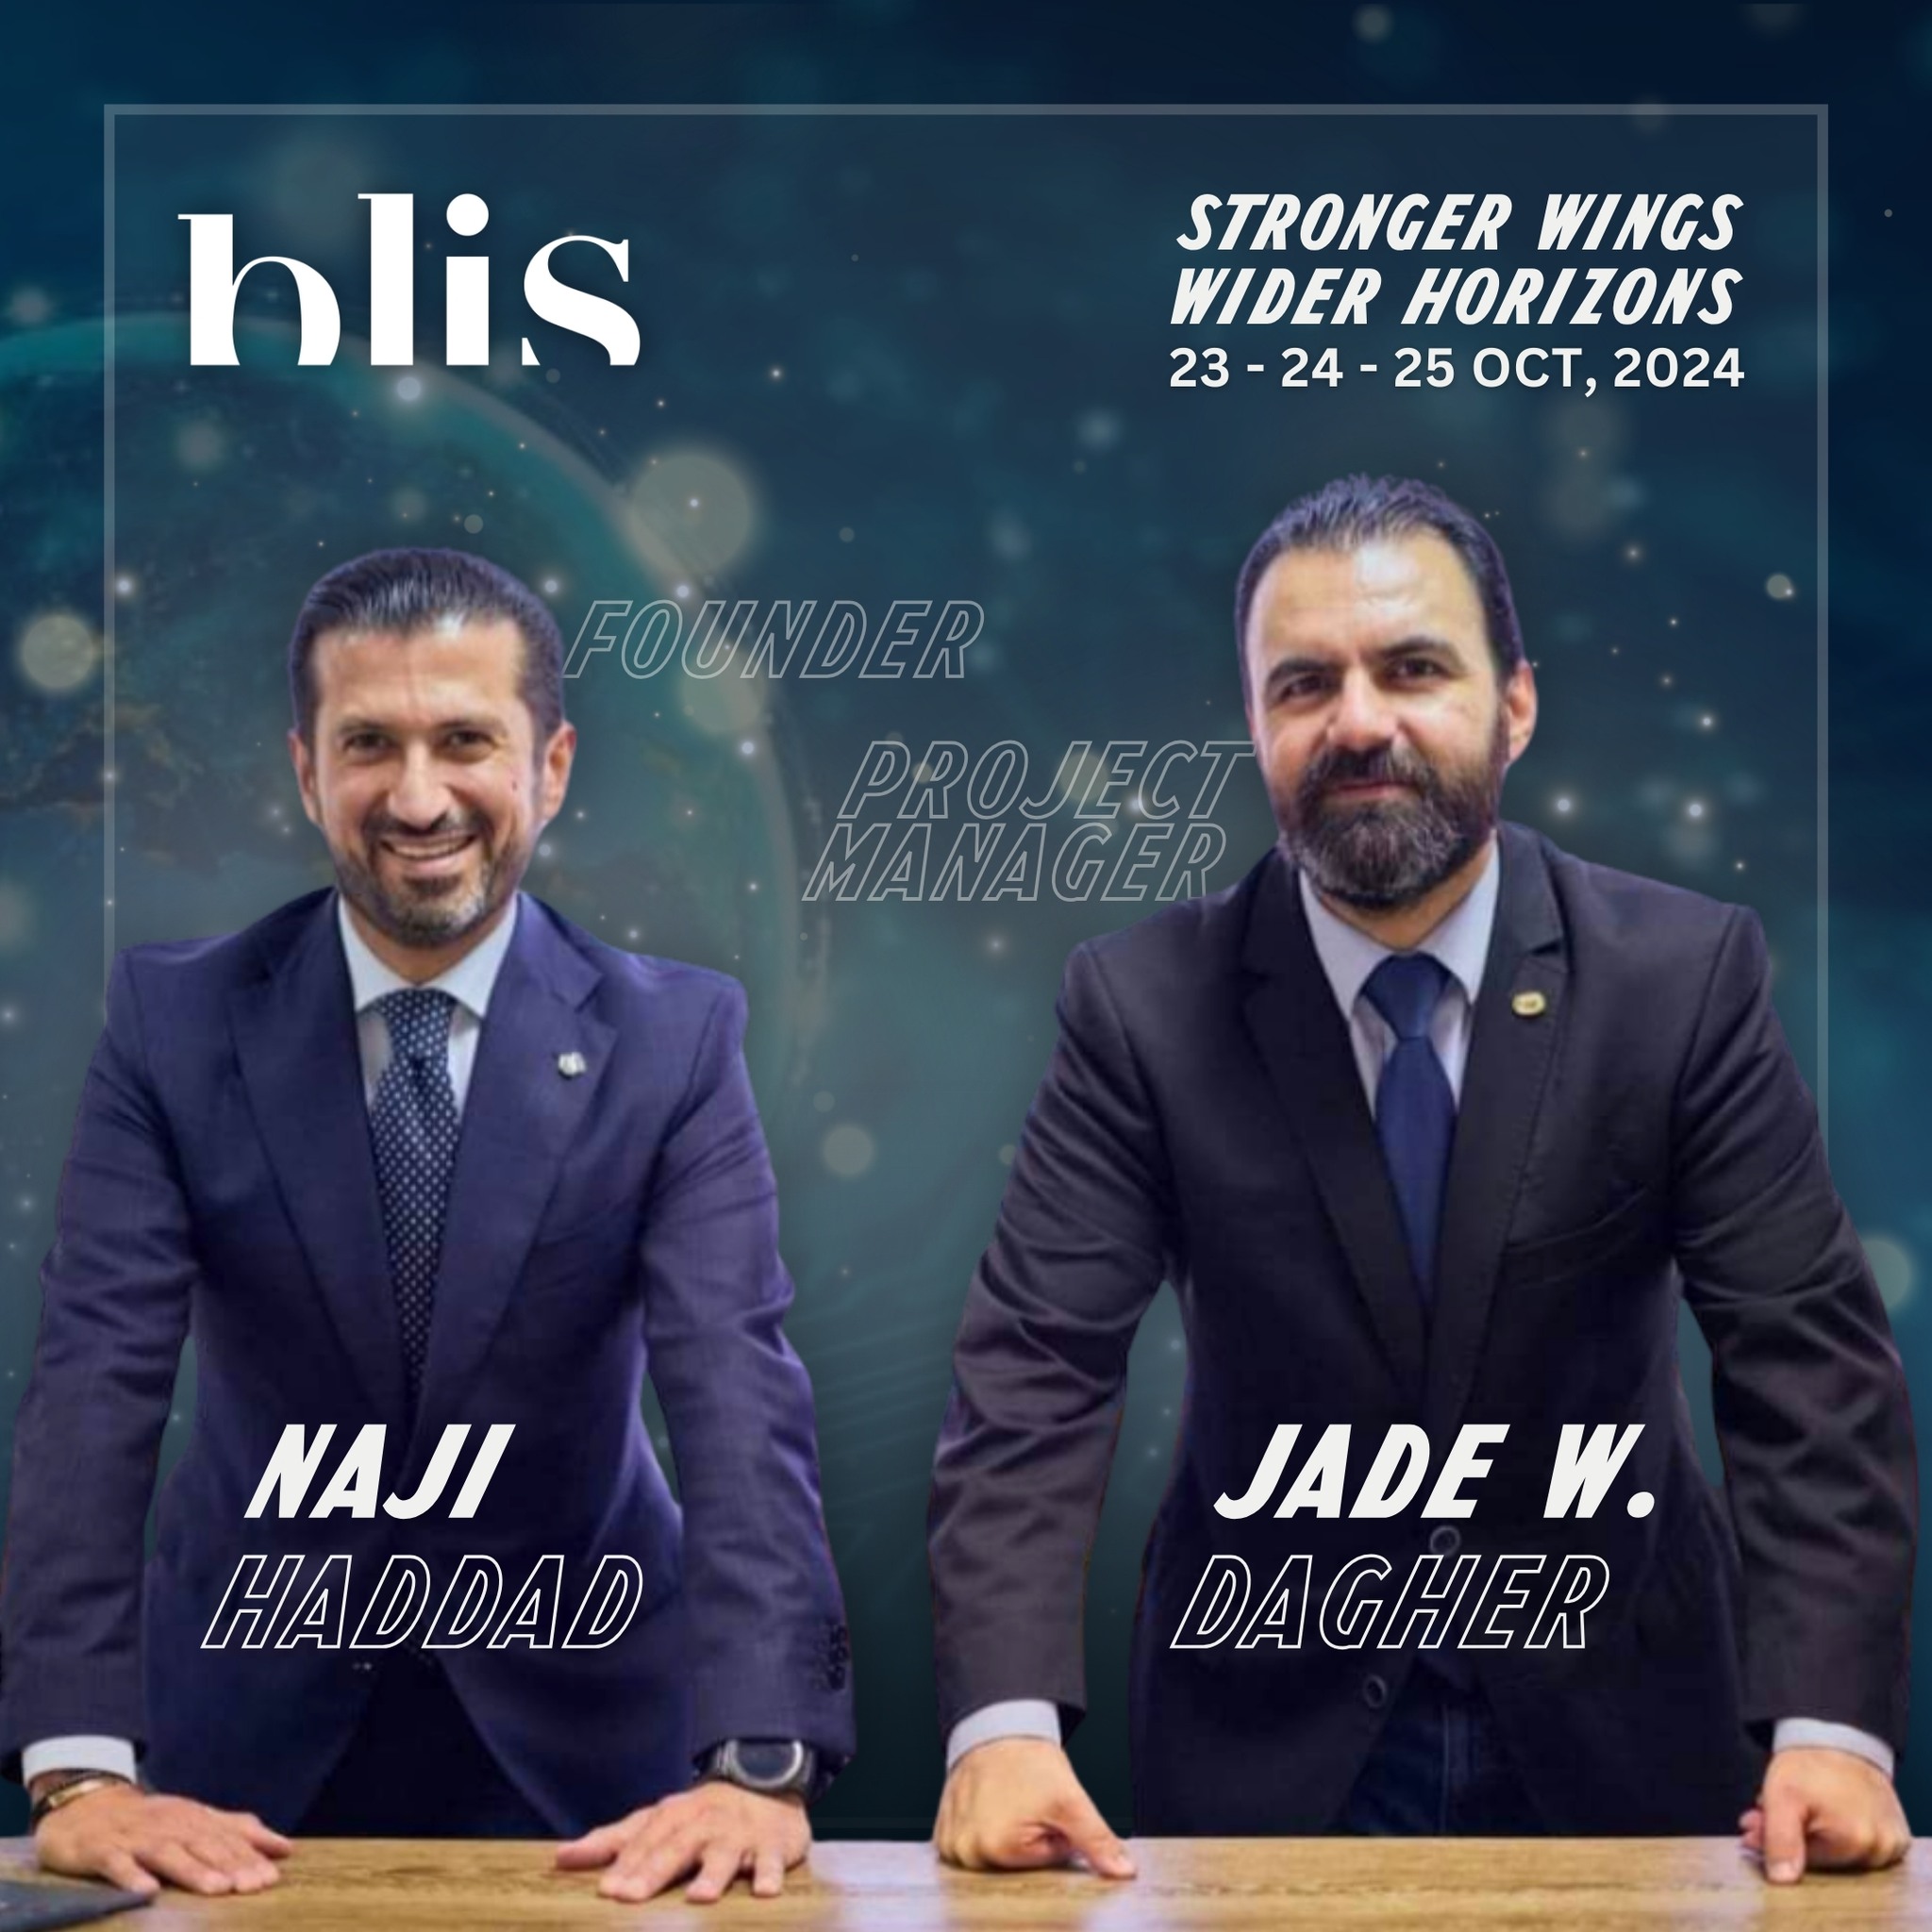 The powerful duo behind BLIS Experience